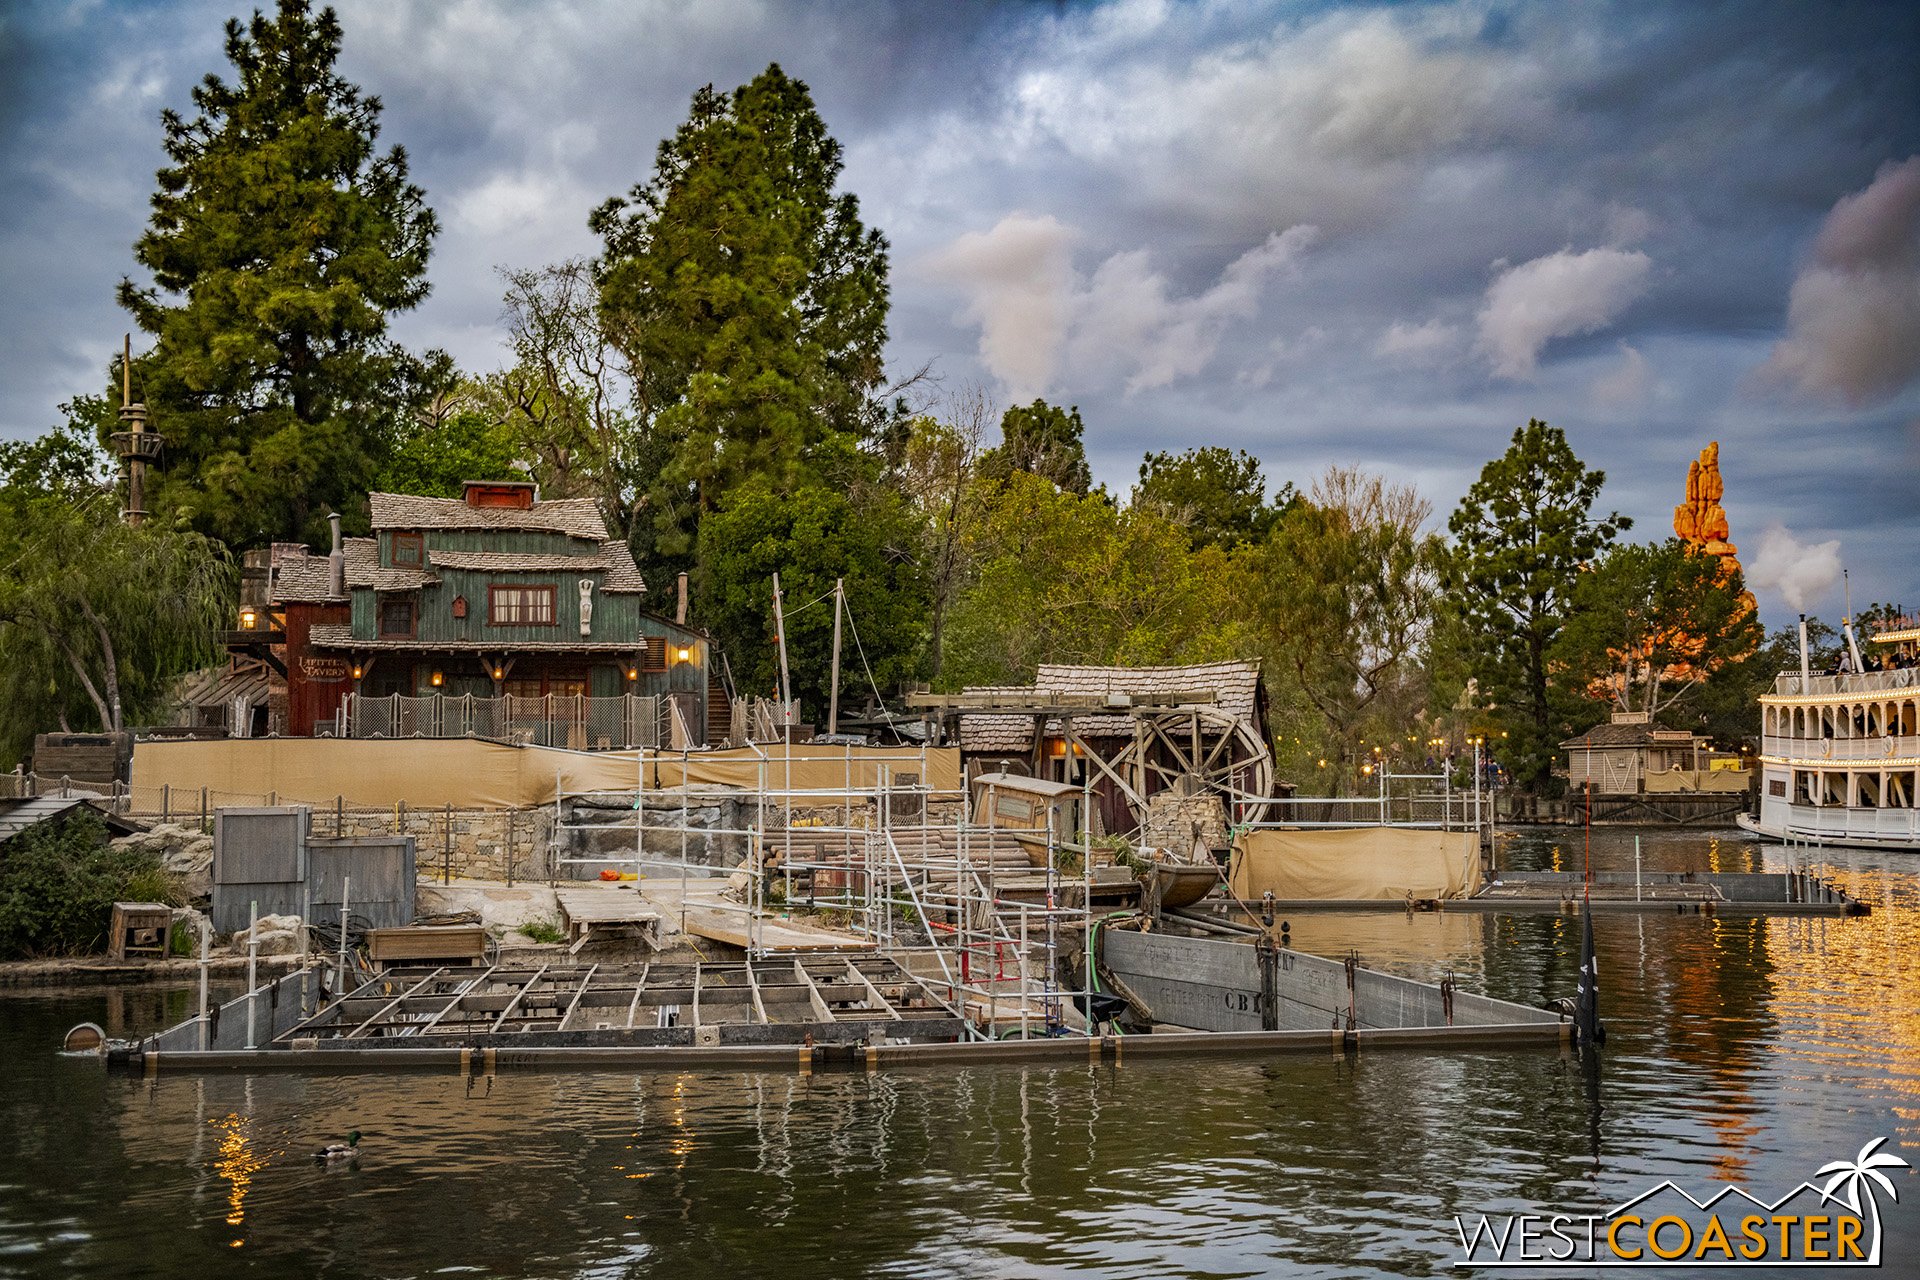  And work has been happening at the “stage” in front of Tom Sawyer Island too. 